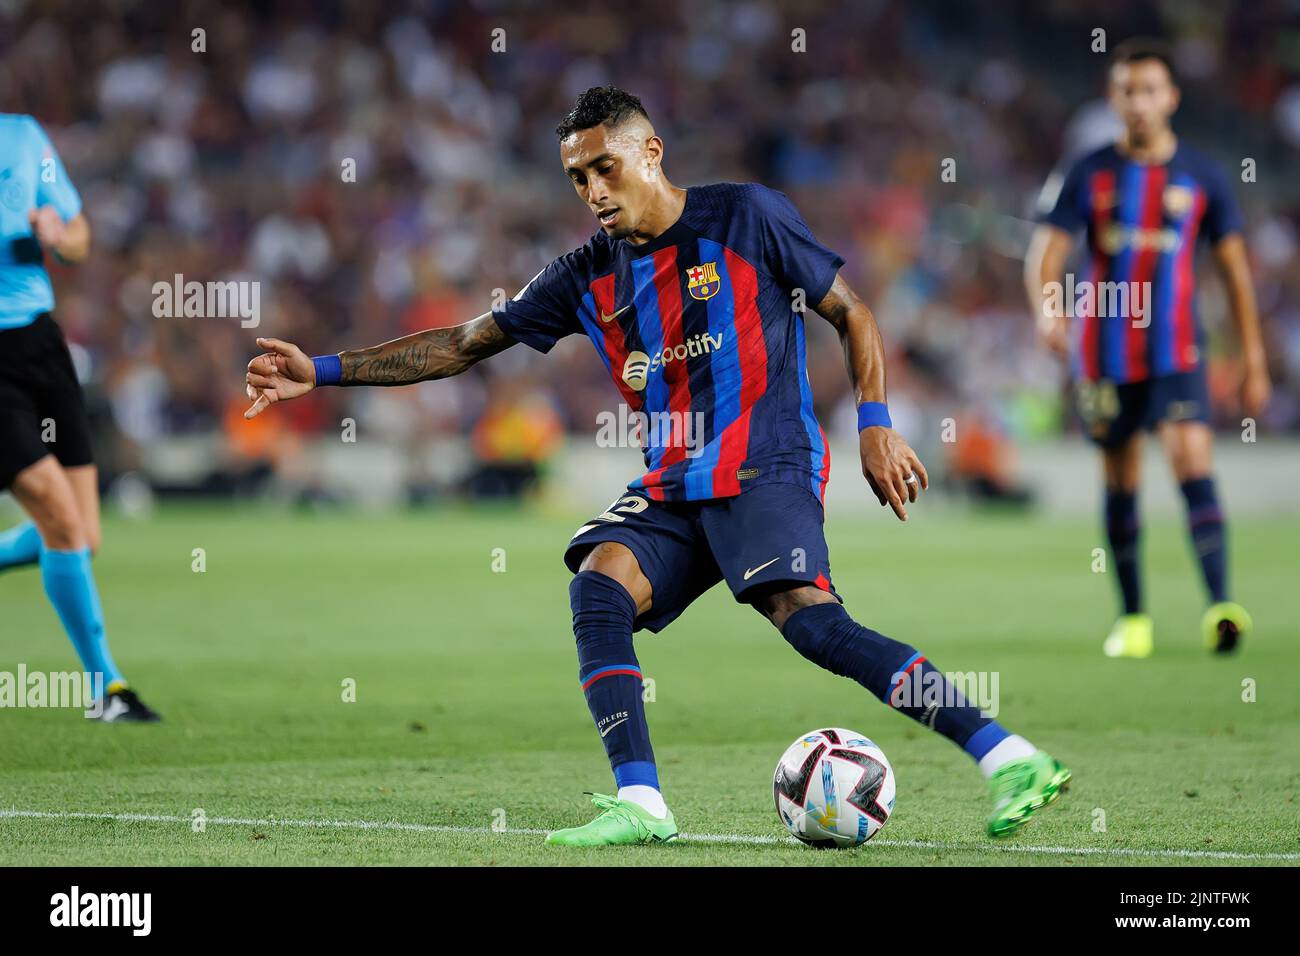 Barcelona, Spain. 13th Aug, 2022. Raphinha in action during the La Liga match between FC Barcelona and Rayo Vallecano at the Spotify Camp Nou Stadium in Barcelona, Spain. Credit: Christian Bertrand/Alamy Live News Stock Photo